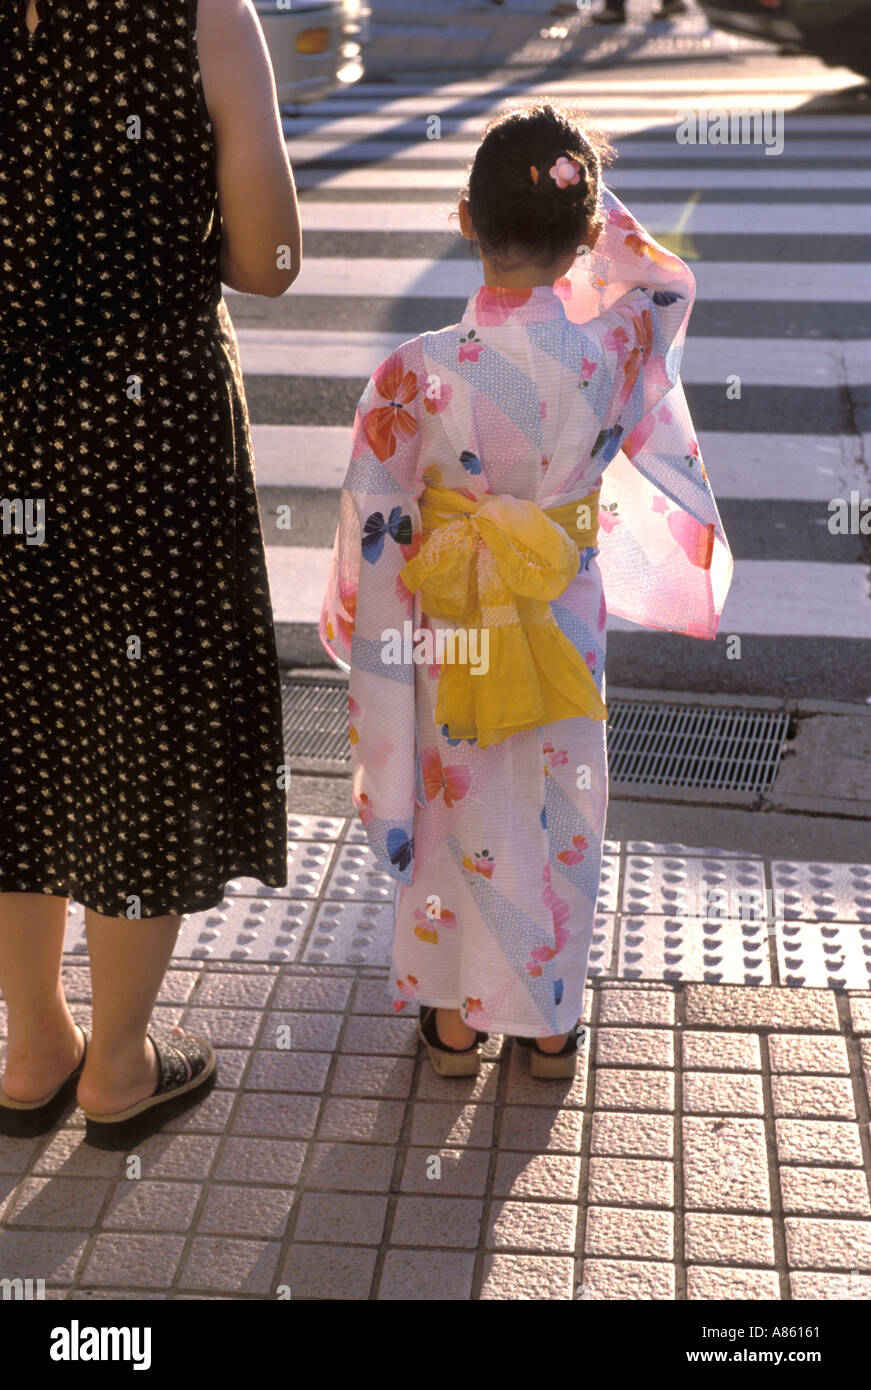 A little girl dressed in a cute summer yukata robe with yellow sash waiting with her mother to cross the street Stock Photo